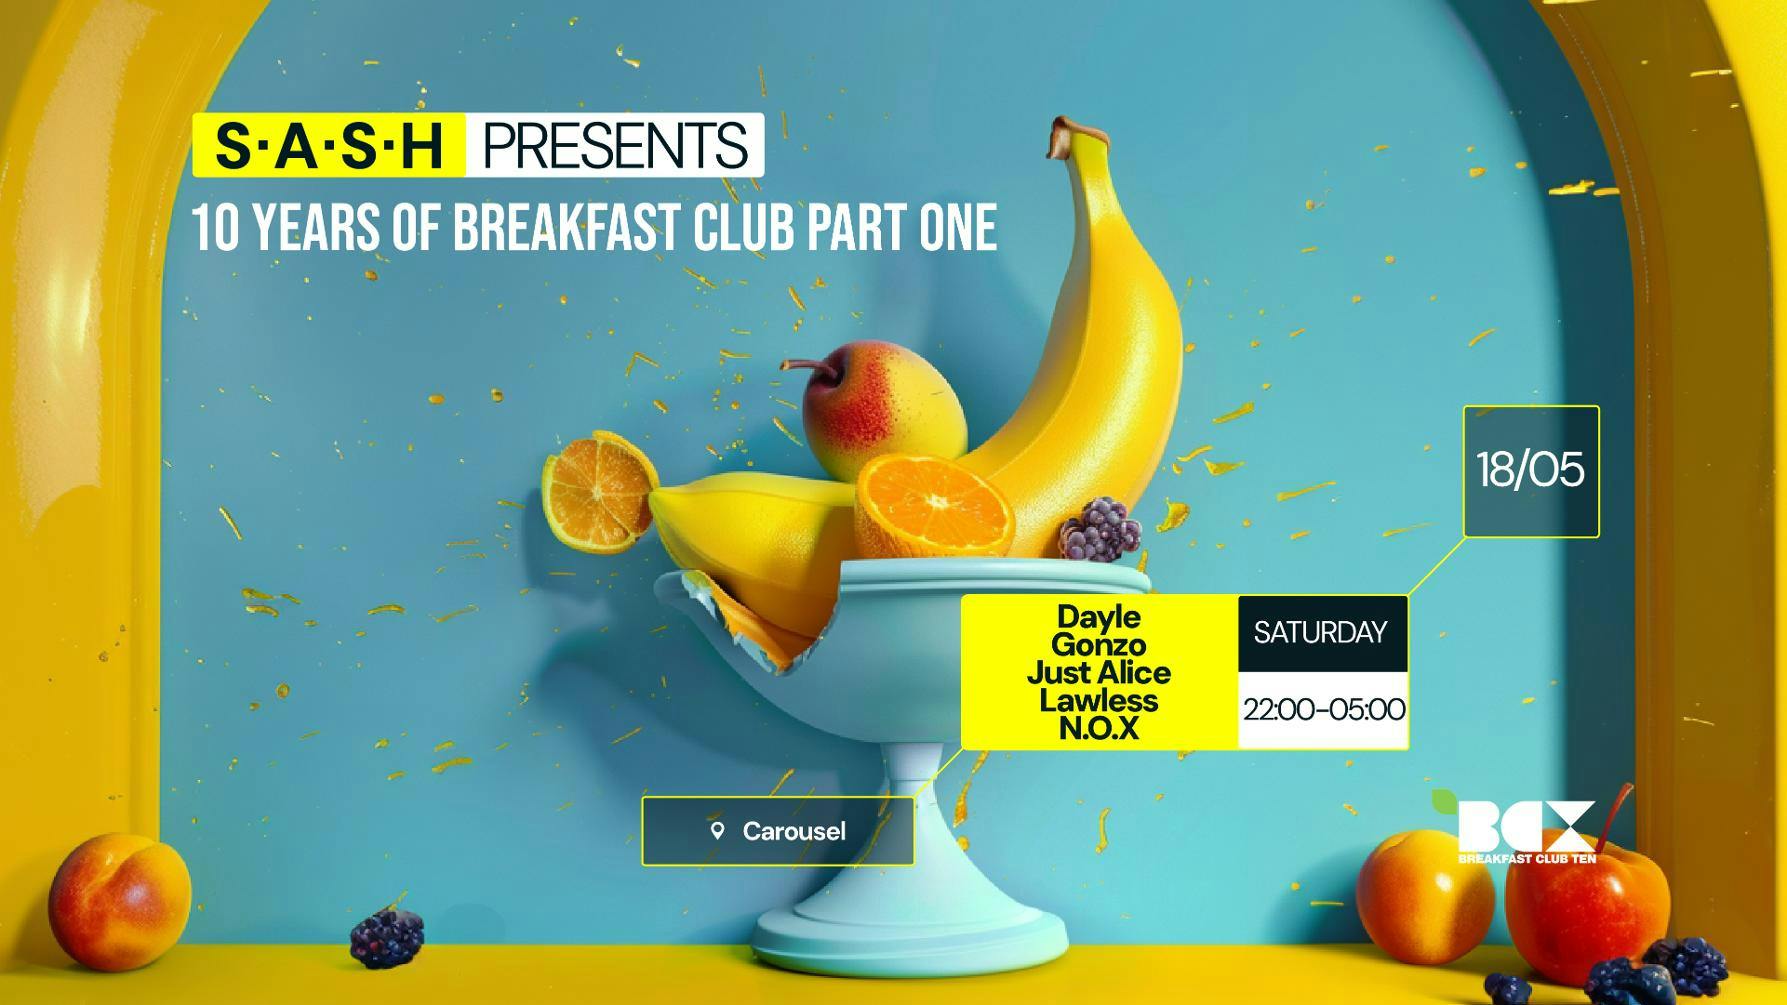 ★ S.A.S.H Presents ★ 10 Years Of Breakfast Club Part One ★ Saturday 18th May ★